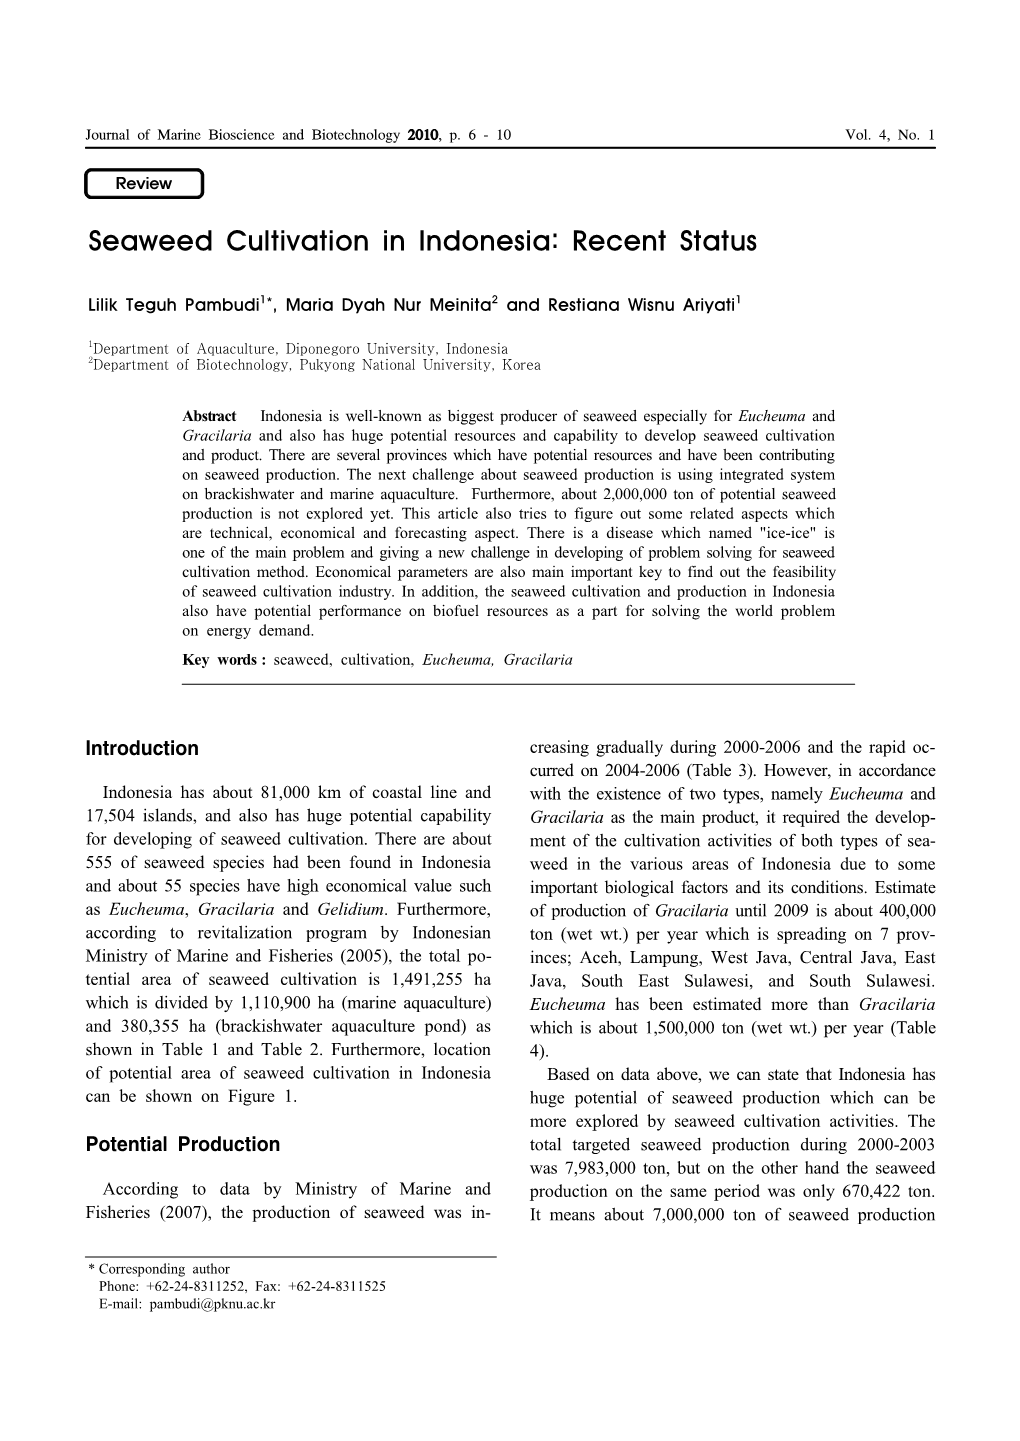 Seaweed Cultivation in Indonesia: Recent Status